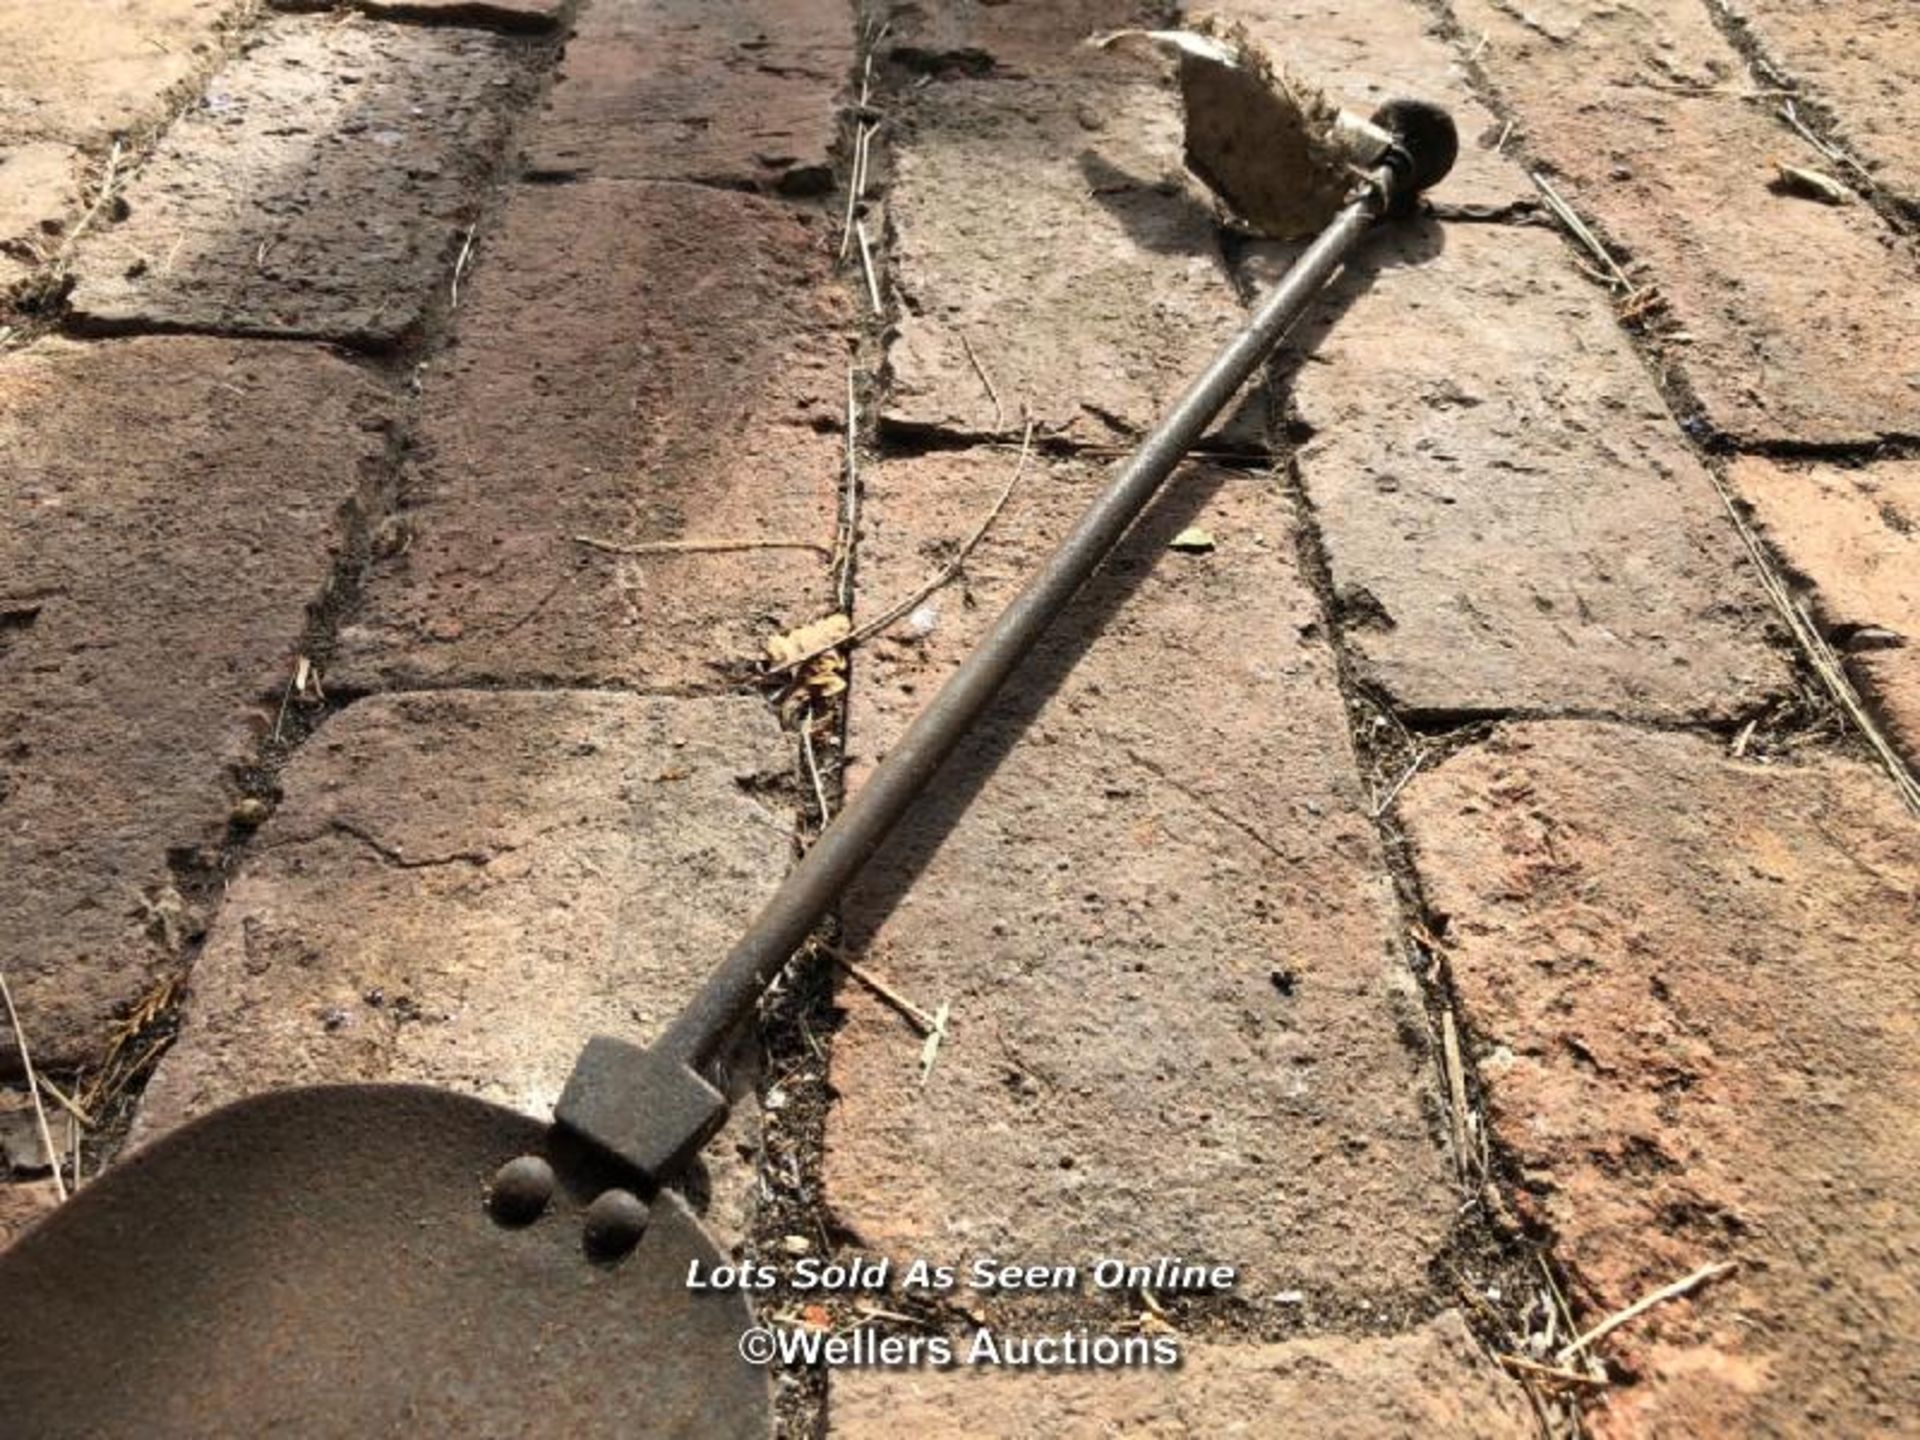 *ORNAMENTAL IRON COAL SHOVEL, 62CM (L) / ITEM LOCATION: GU8, FULL ADDRESS WILL BE GIVEN TO - Image 3 of 3